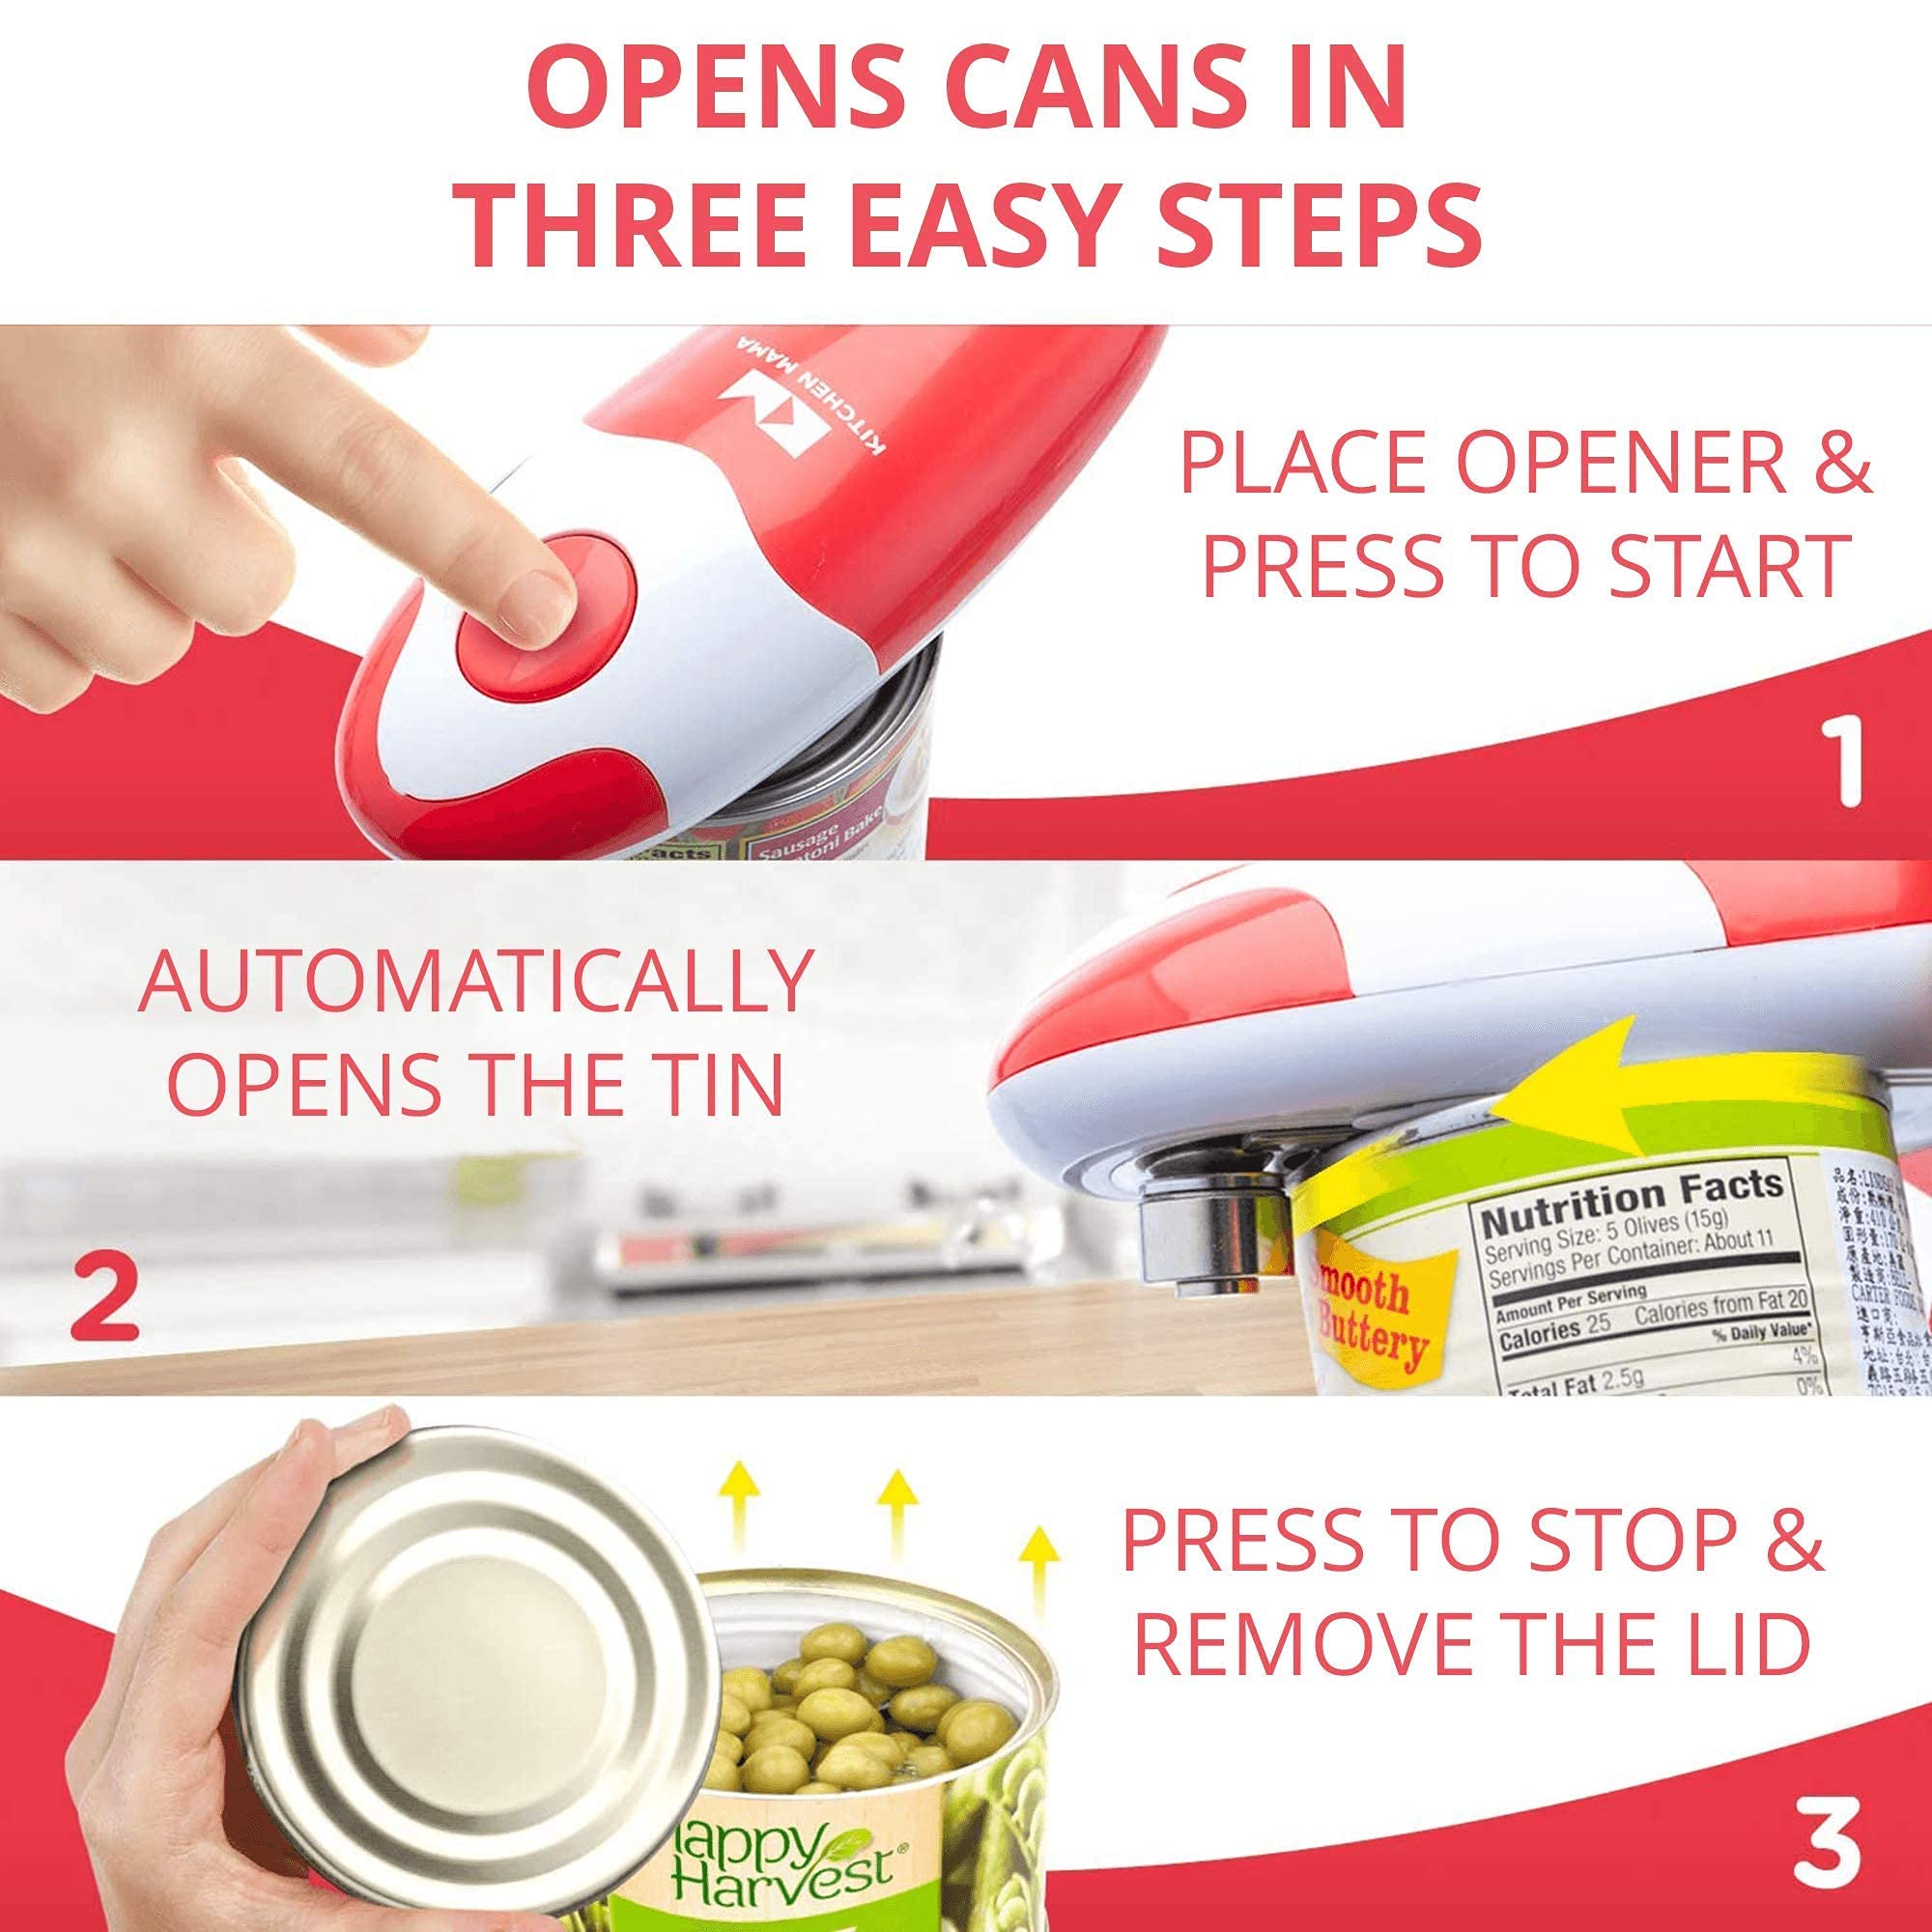 Kitchen Mama Electric Can Opener: Smooth Edge, Food-Safe and Battery Operated Can Opener (Bundle Red and White)